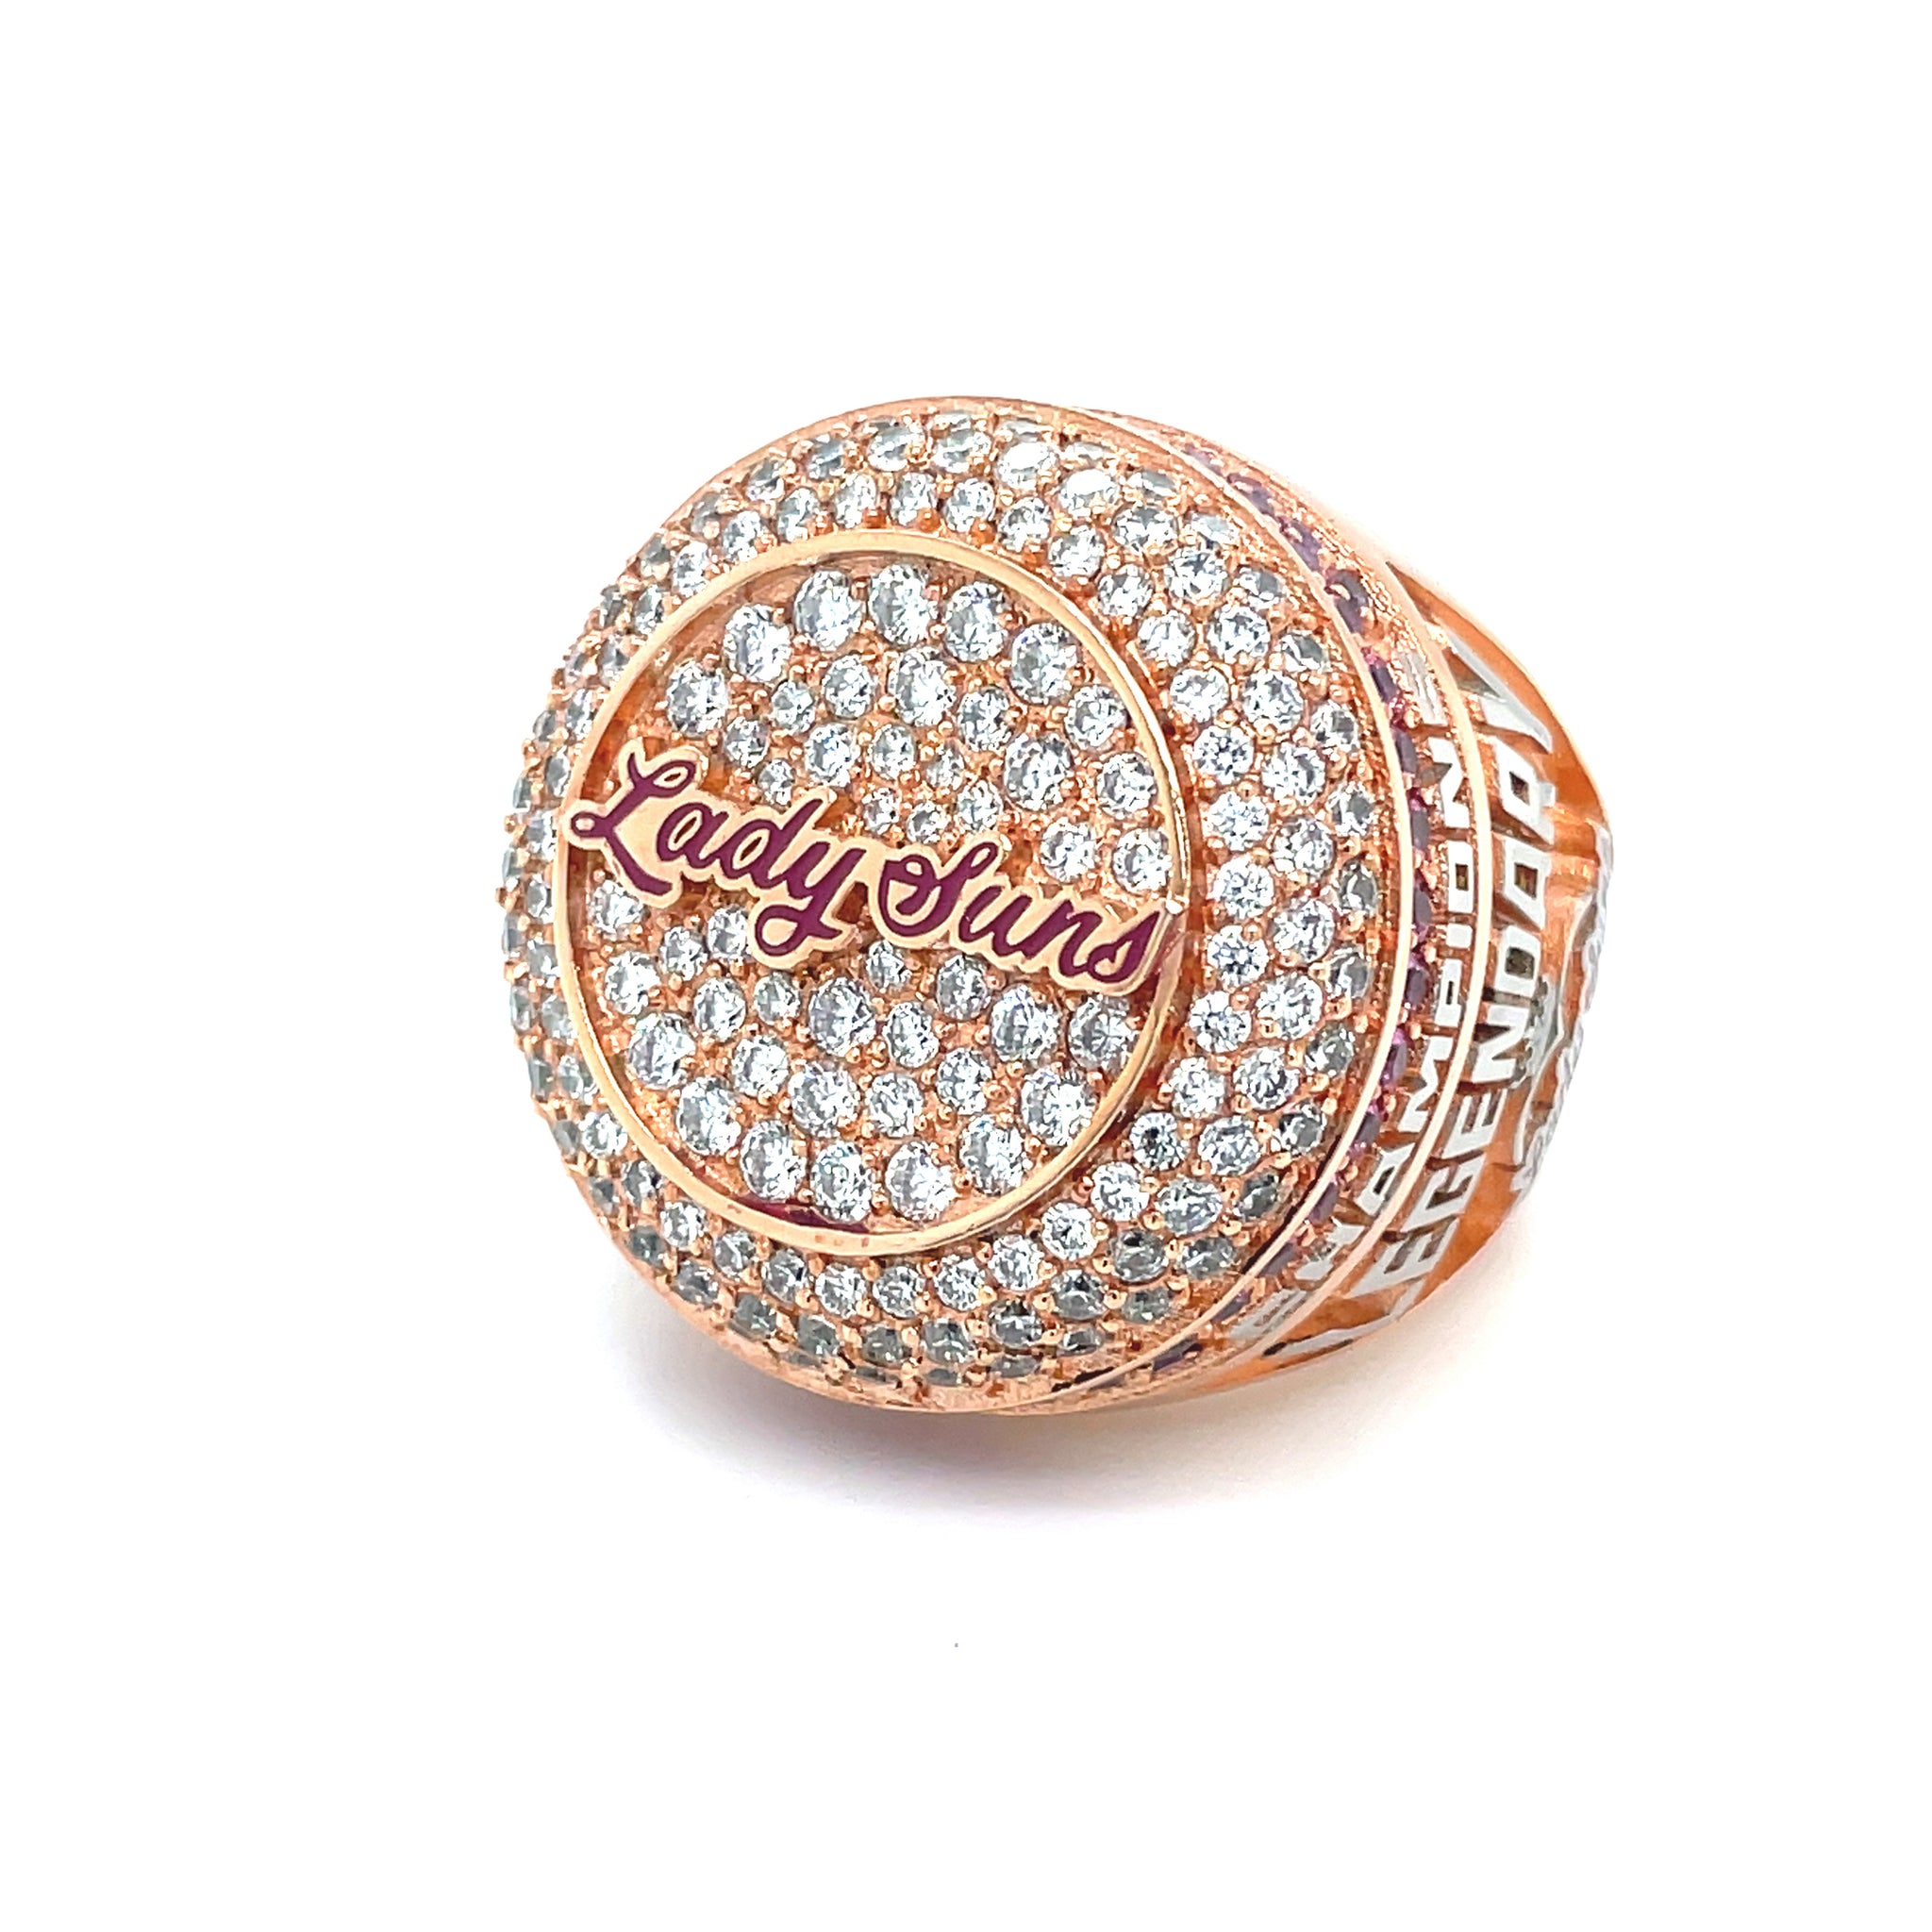 Cheer Central Suns - Lady Suns - 2021 National Championship Ring